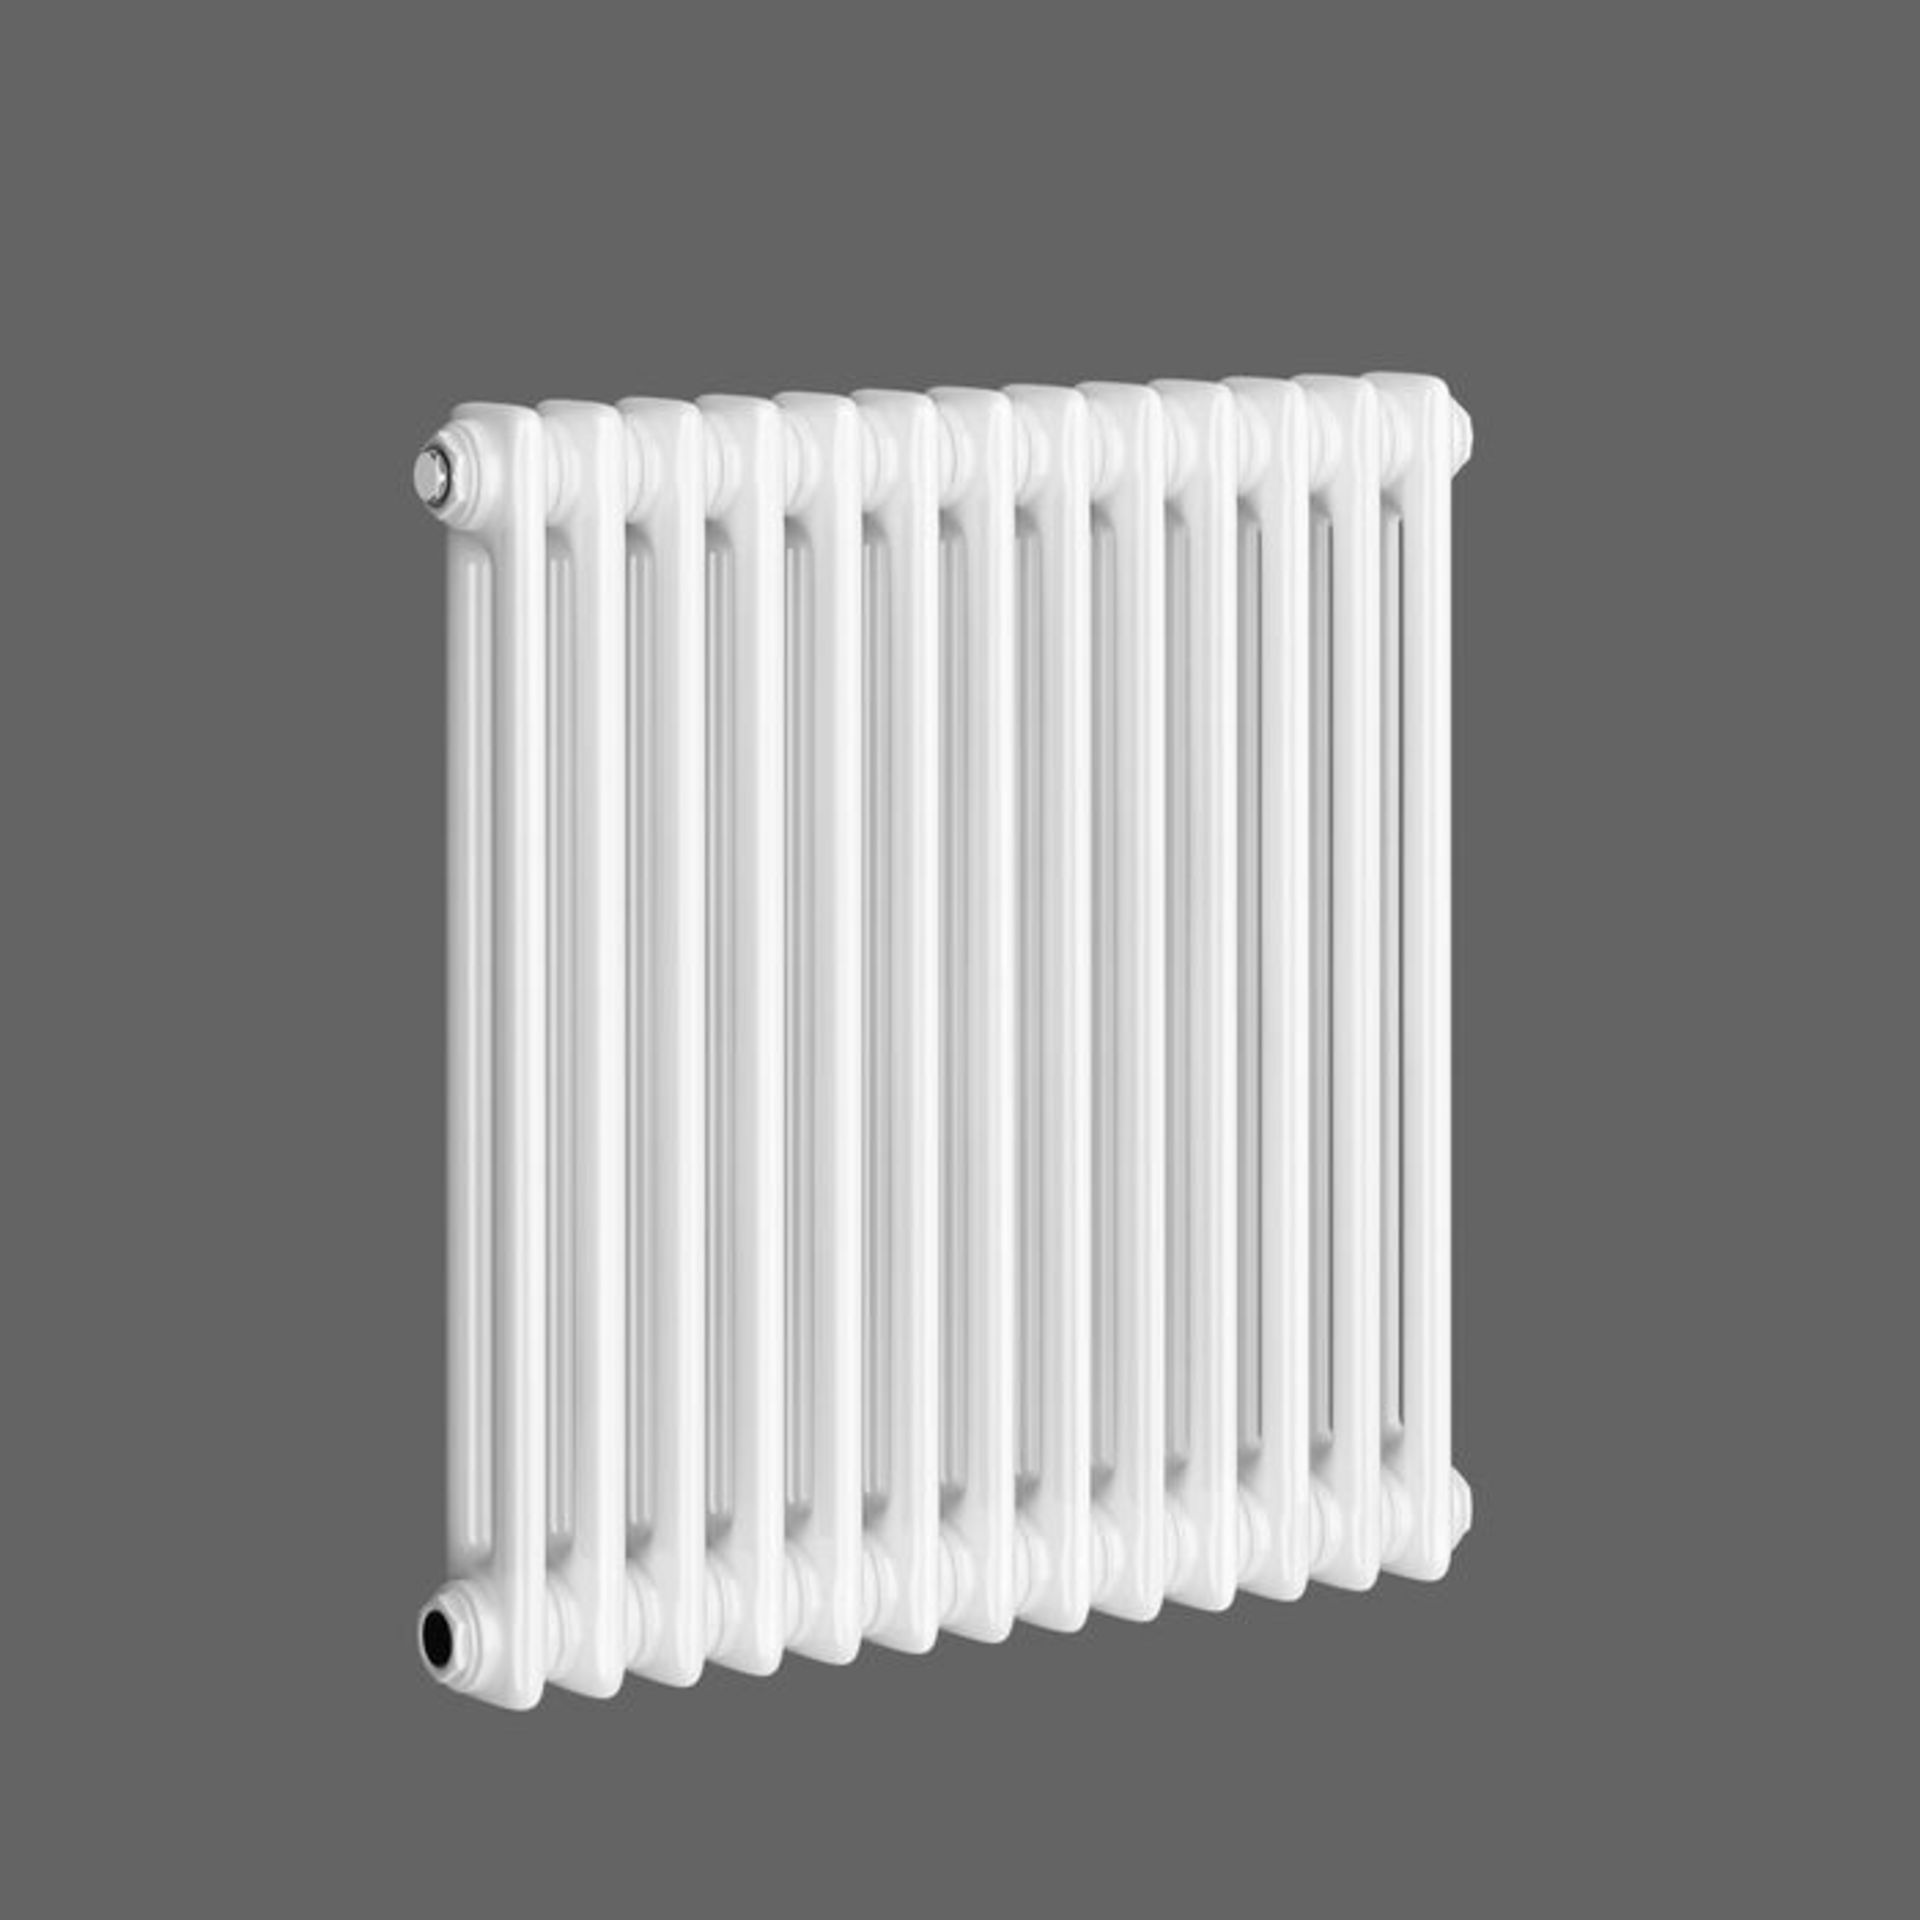 (QQ94) 600x628mm White Double Panel Horizontal Colosseum Traditional Radiator. For elegant styl... - Image 4 of 4